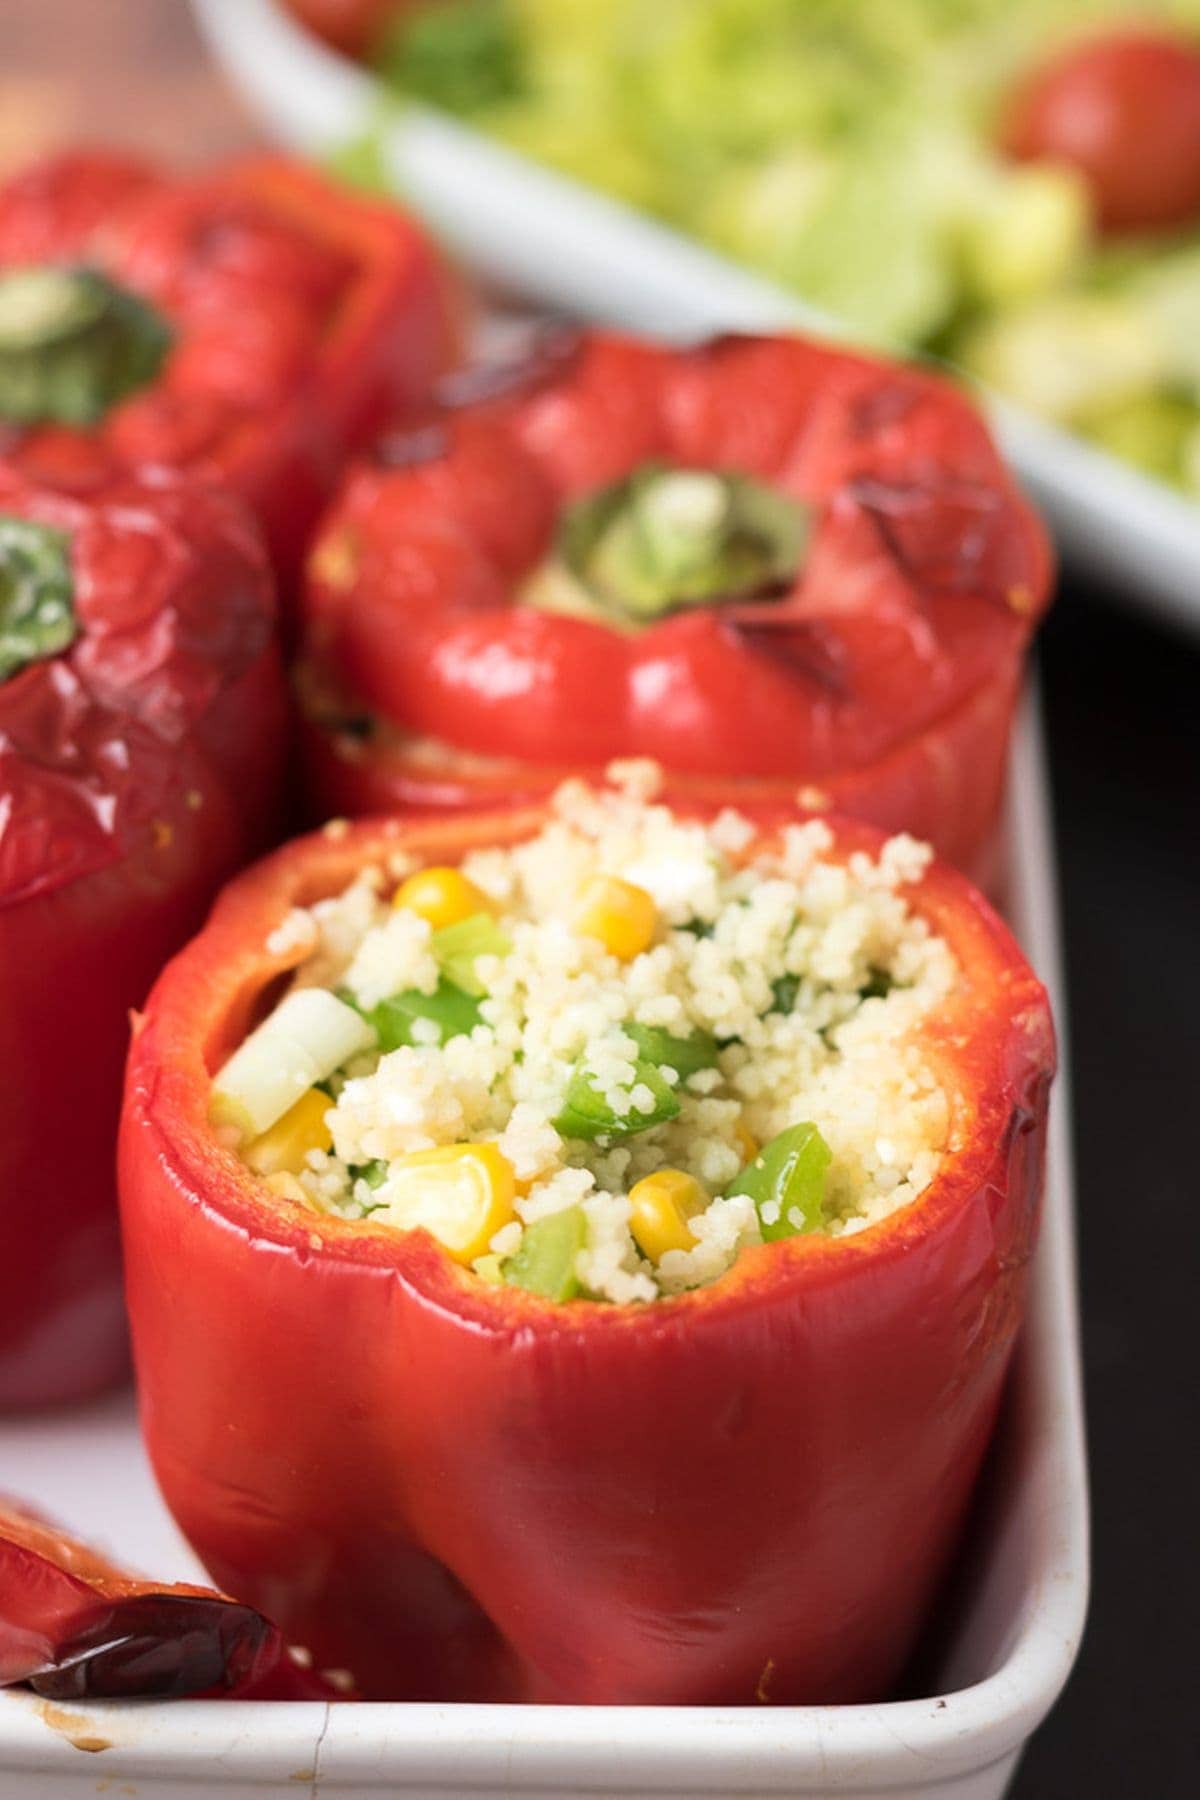 Close up of vegetarian couscous stuffed peppers sitting upright in a casserole dish showing the filling of the front pepper. Salad dish in the background.